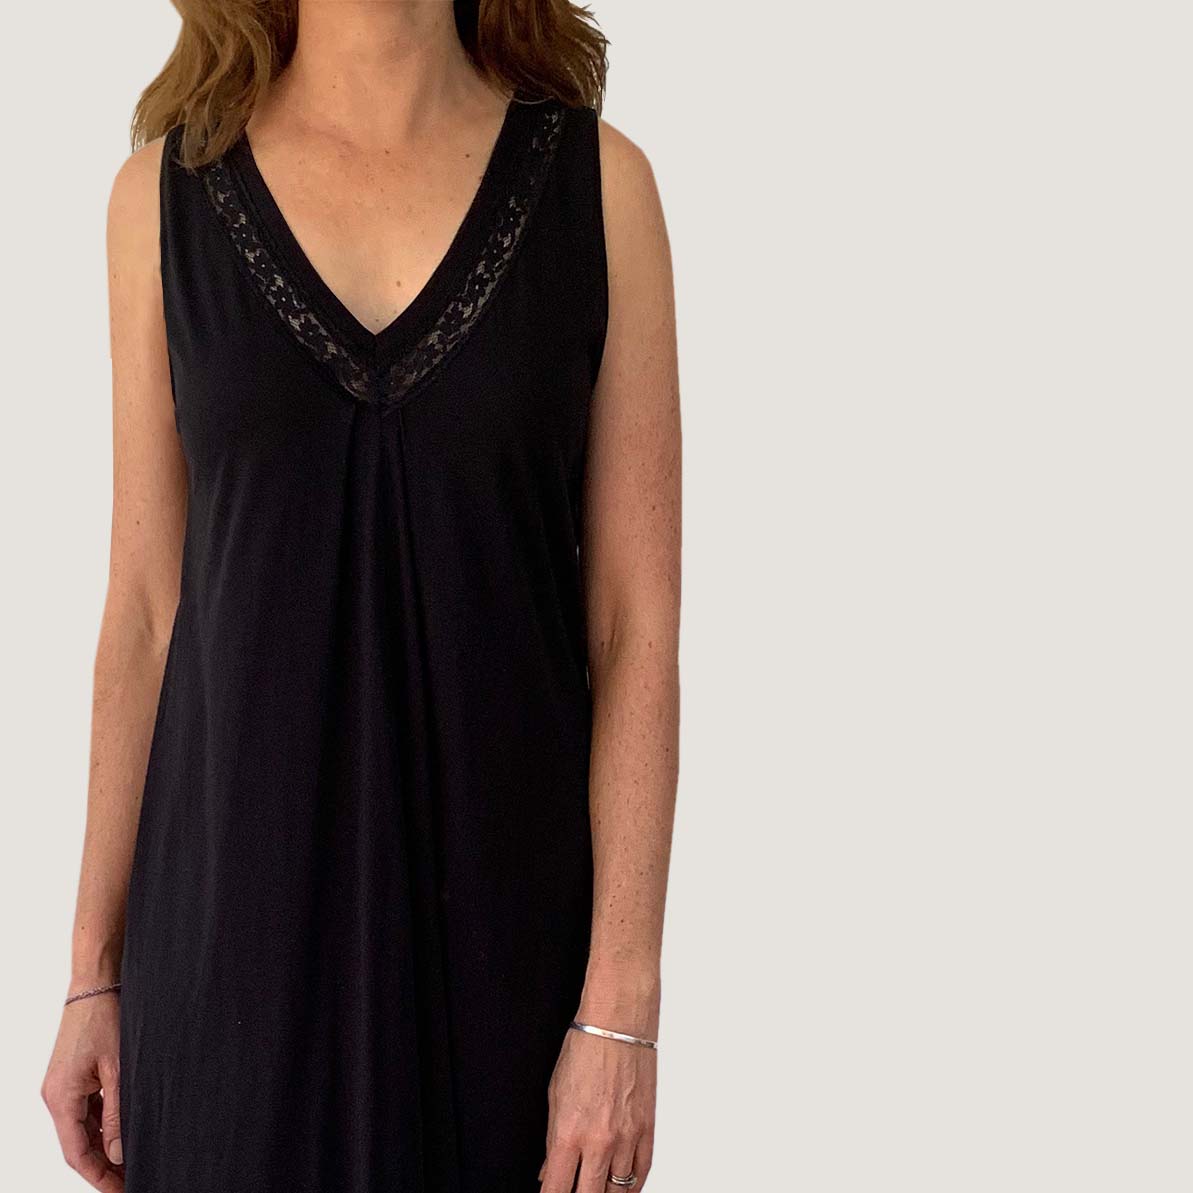 Miami Summer Nightgown in Black or White